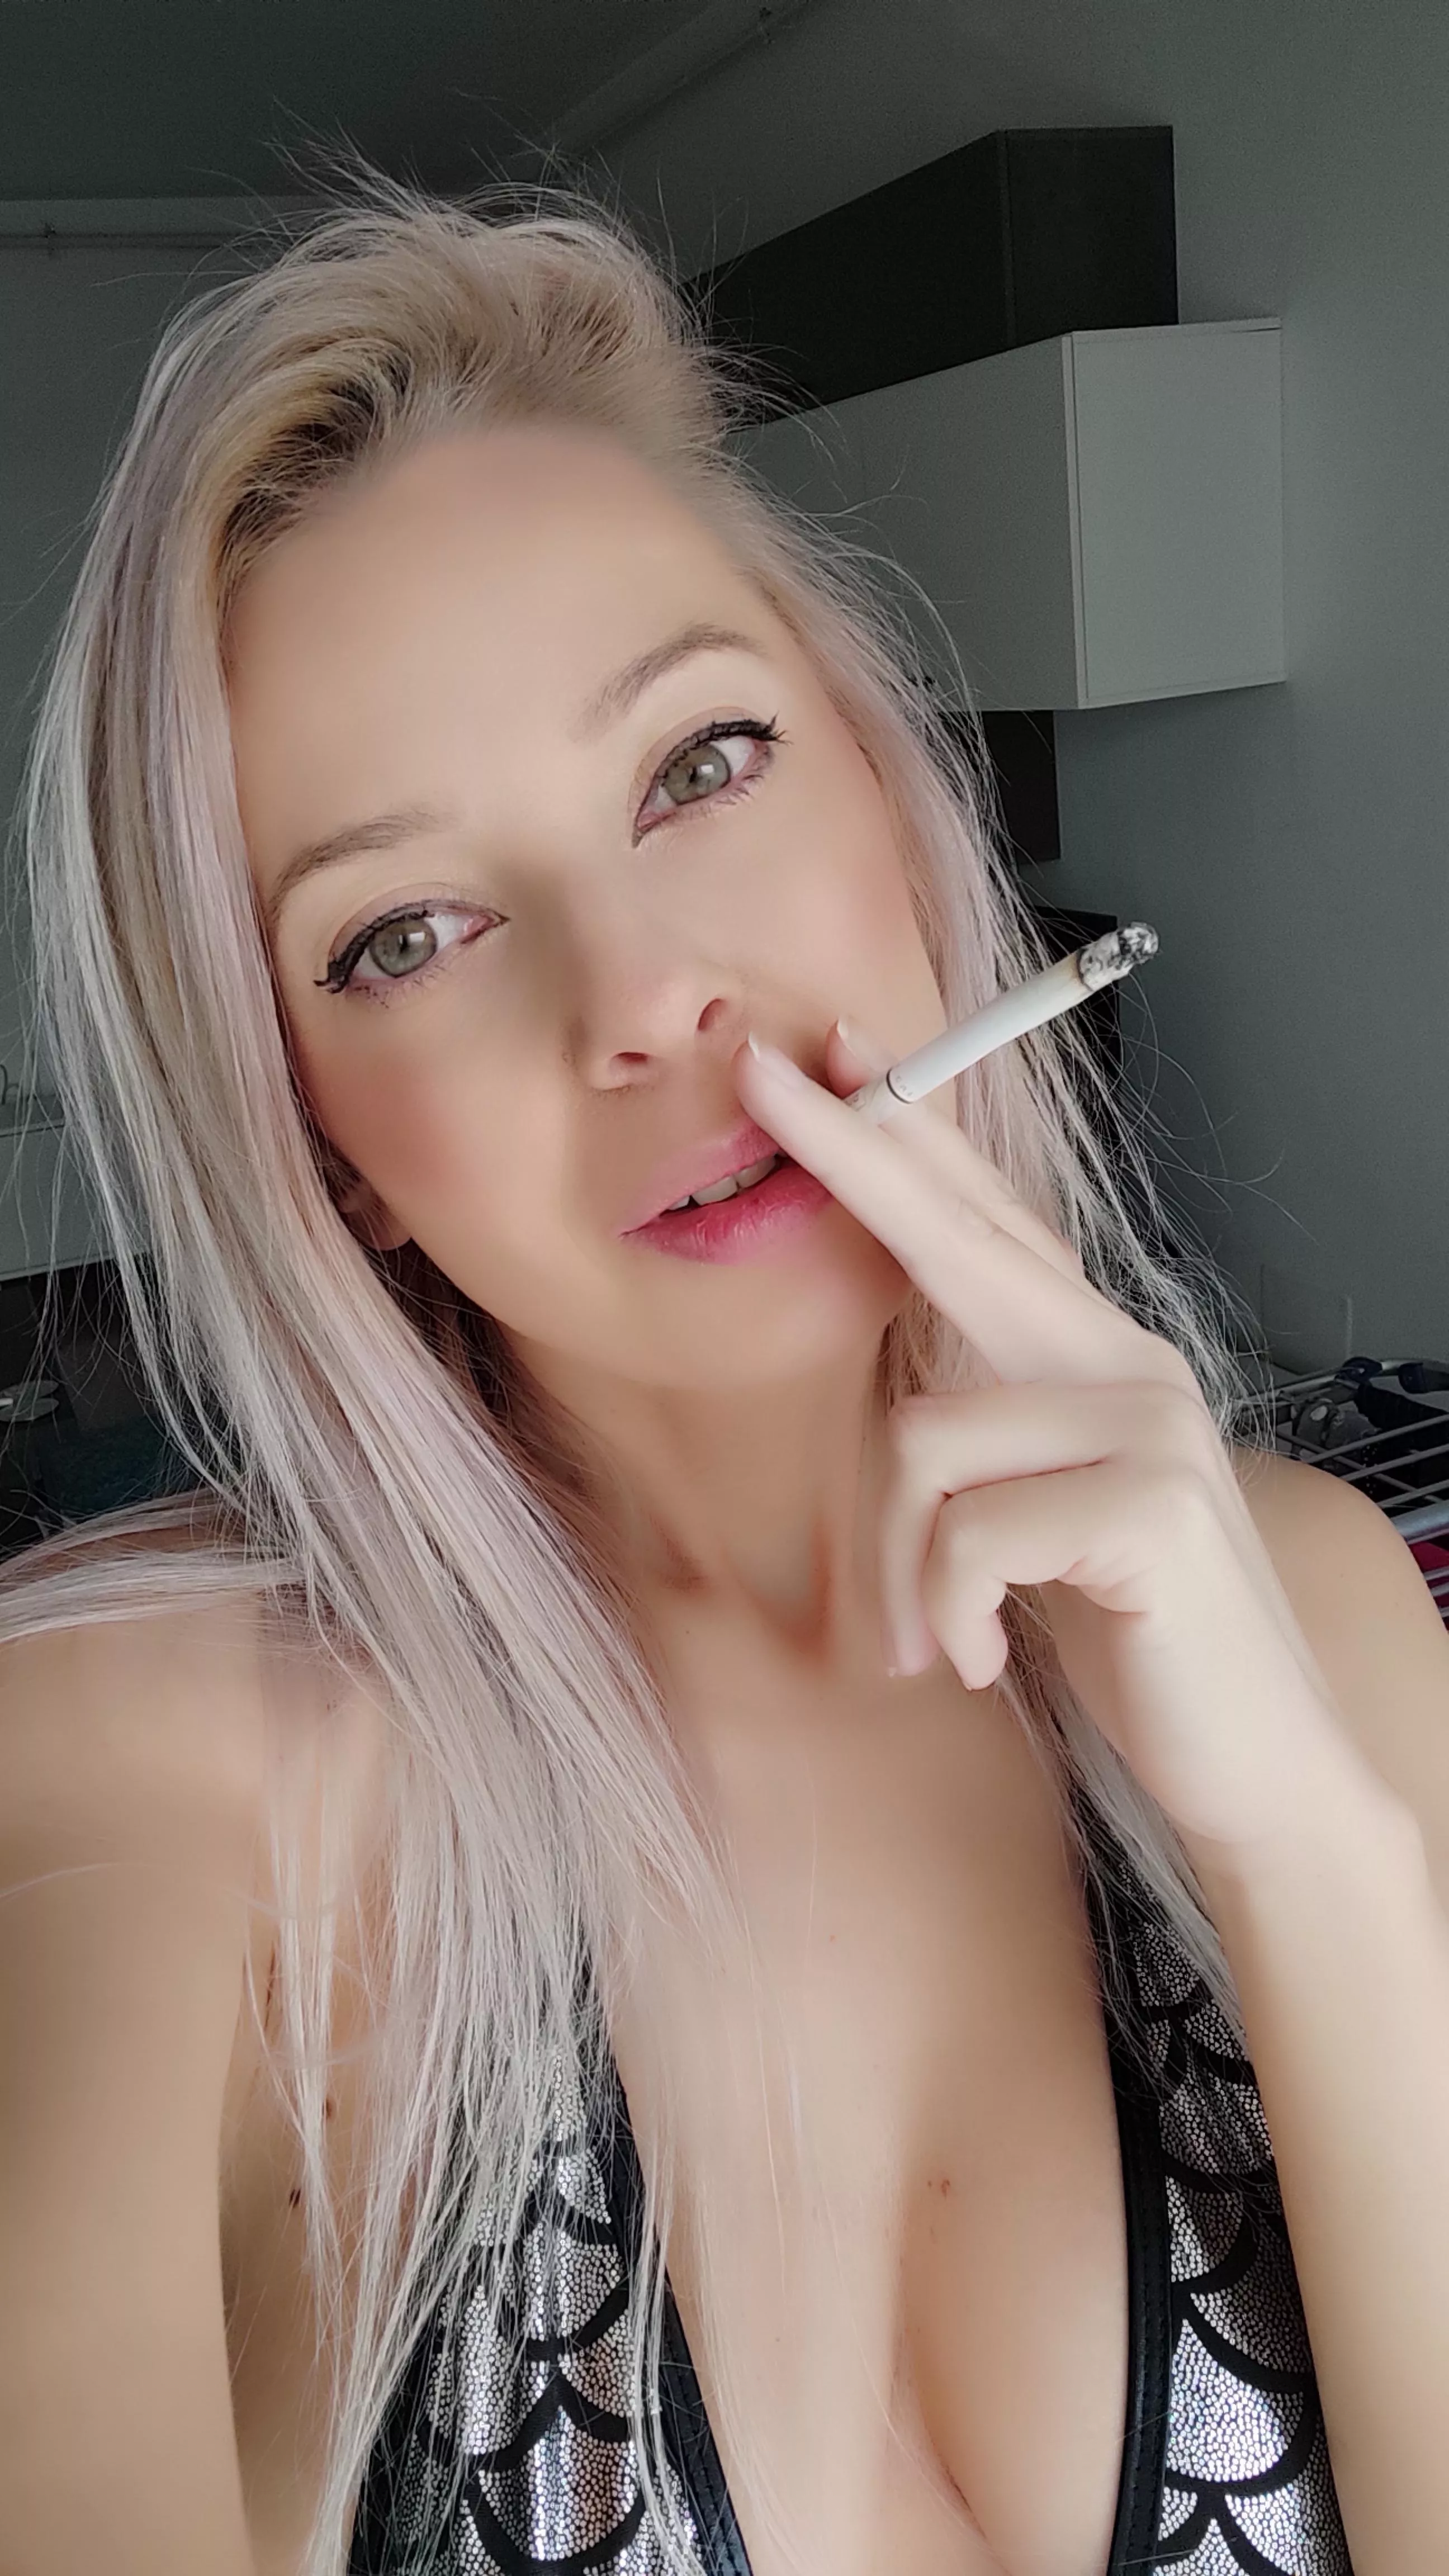 Lets have a cigarette after sex! nudes smokingfetish NUDE-PICS